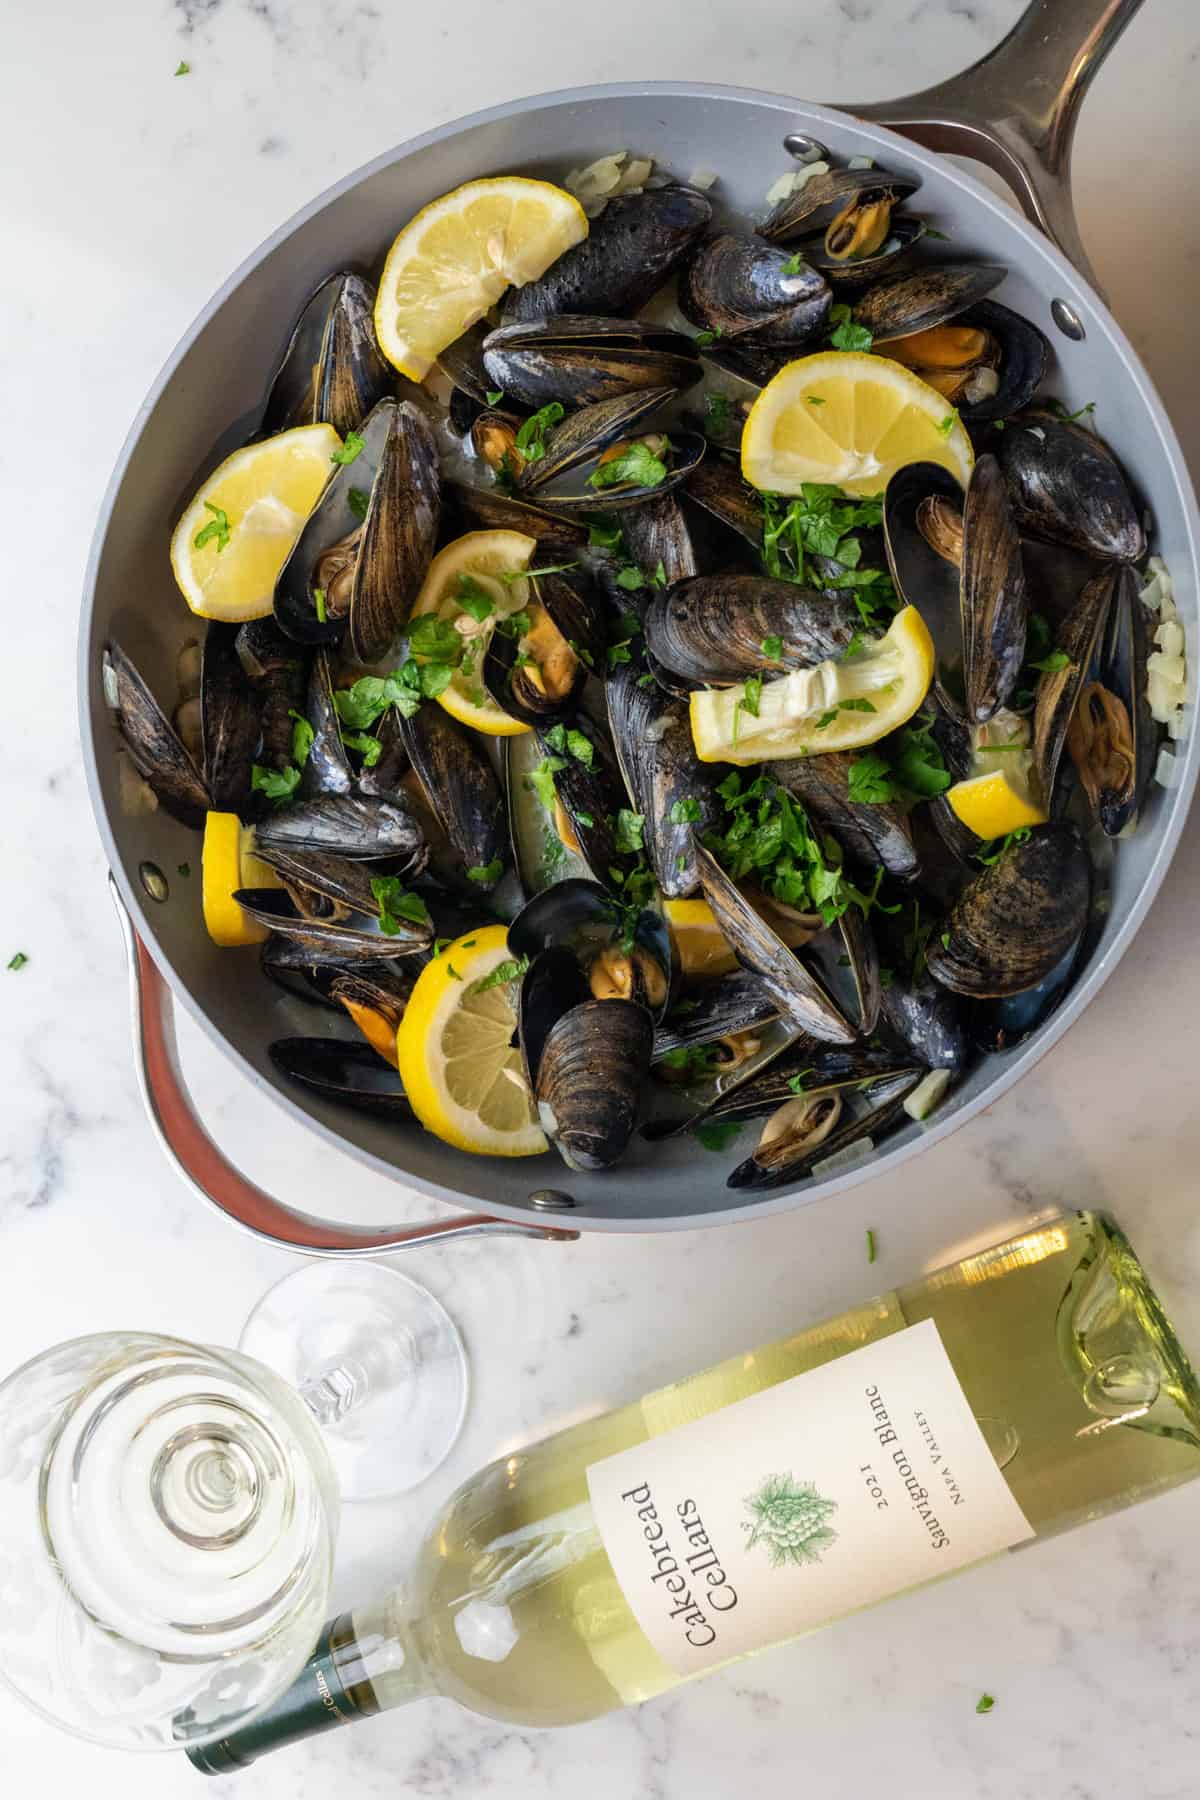 These mussels in White Wine Cream Sauce is made with mussels, butter, garlic cloves, onion, white wine, heavy cream, lemon, and parsley.